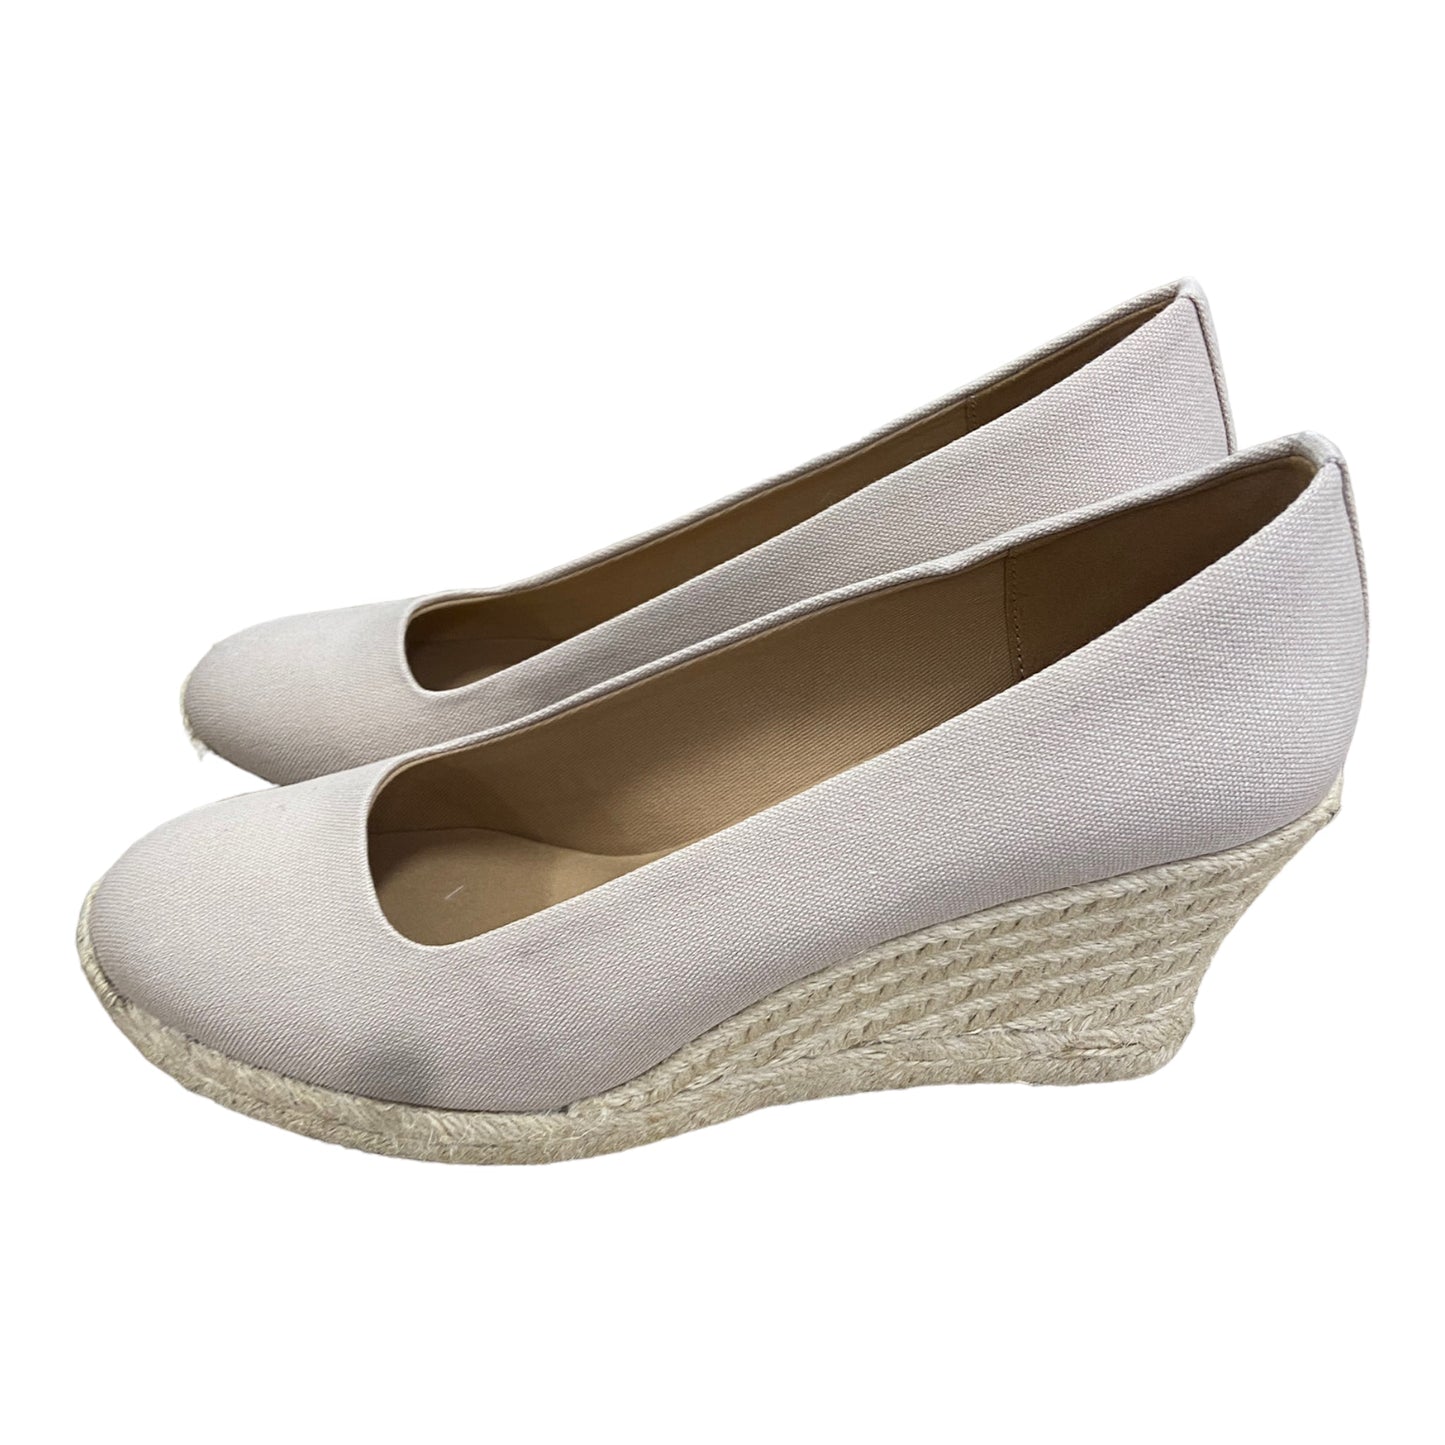 Shoes Heels Espadrille Wedge By J Crew  Size: 9